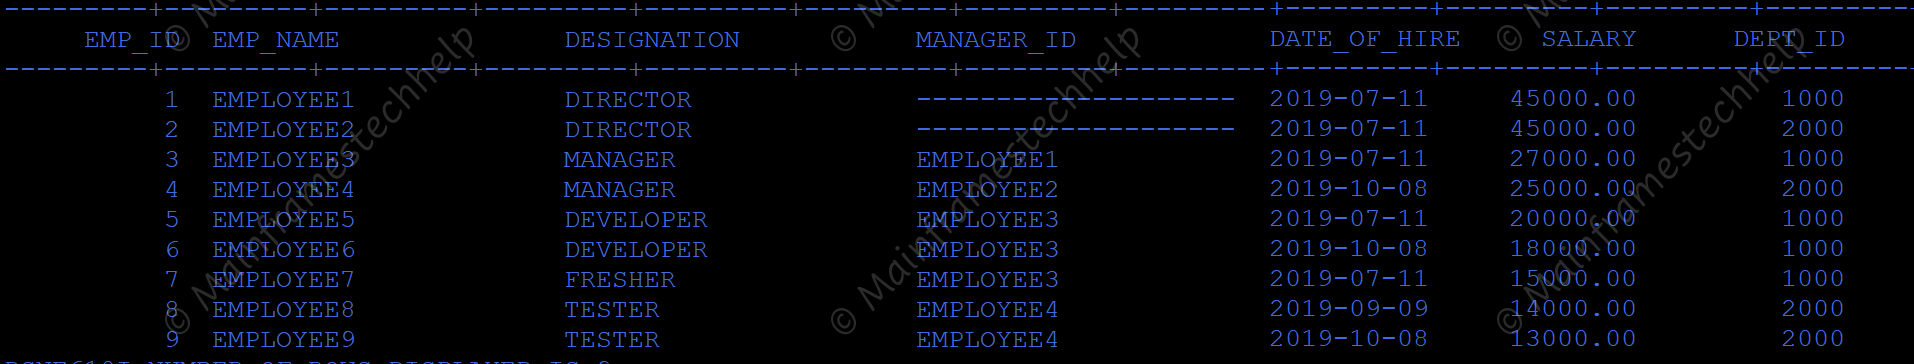 employee_details table